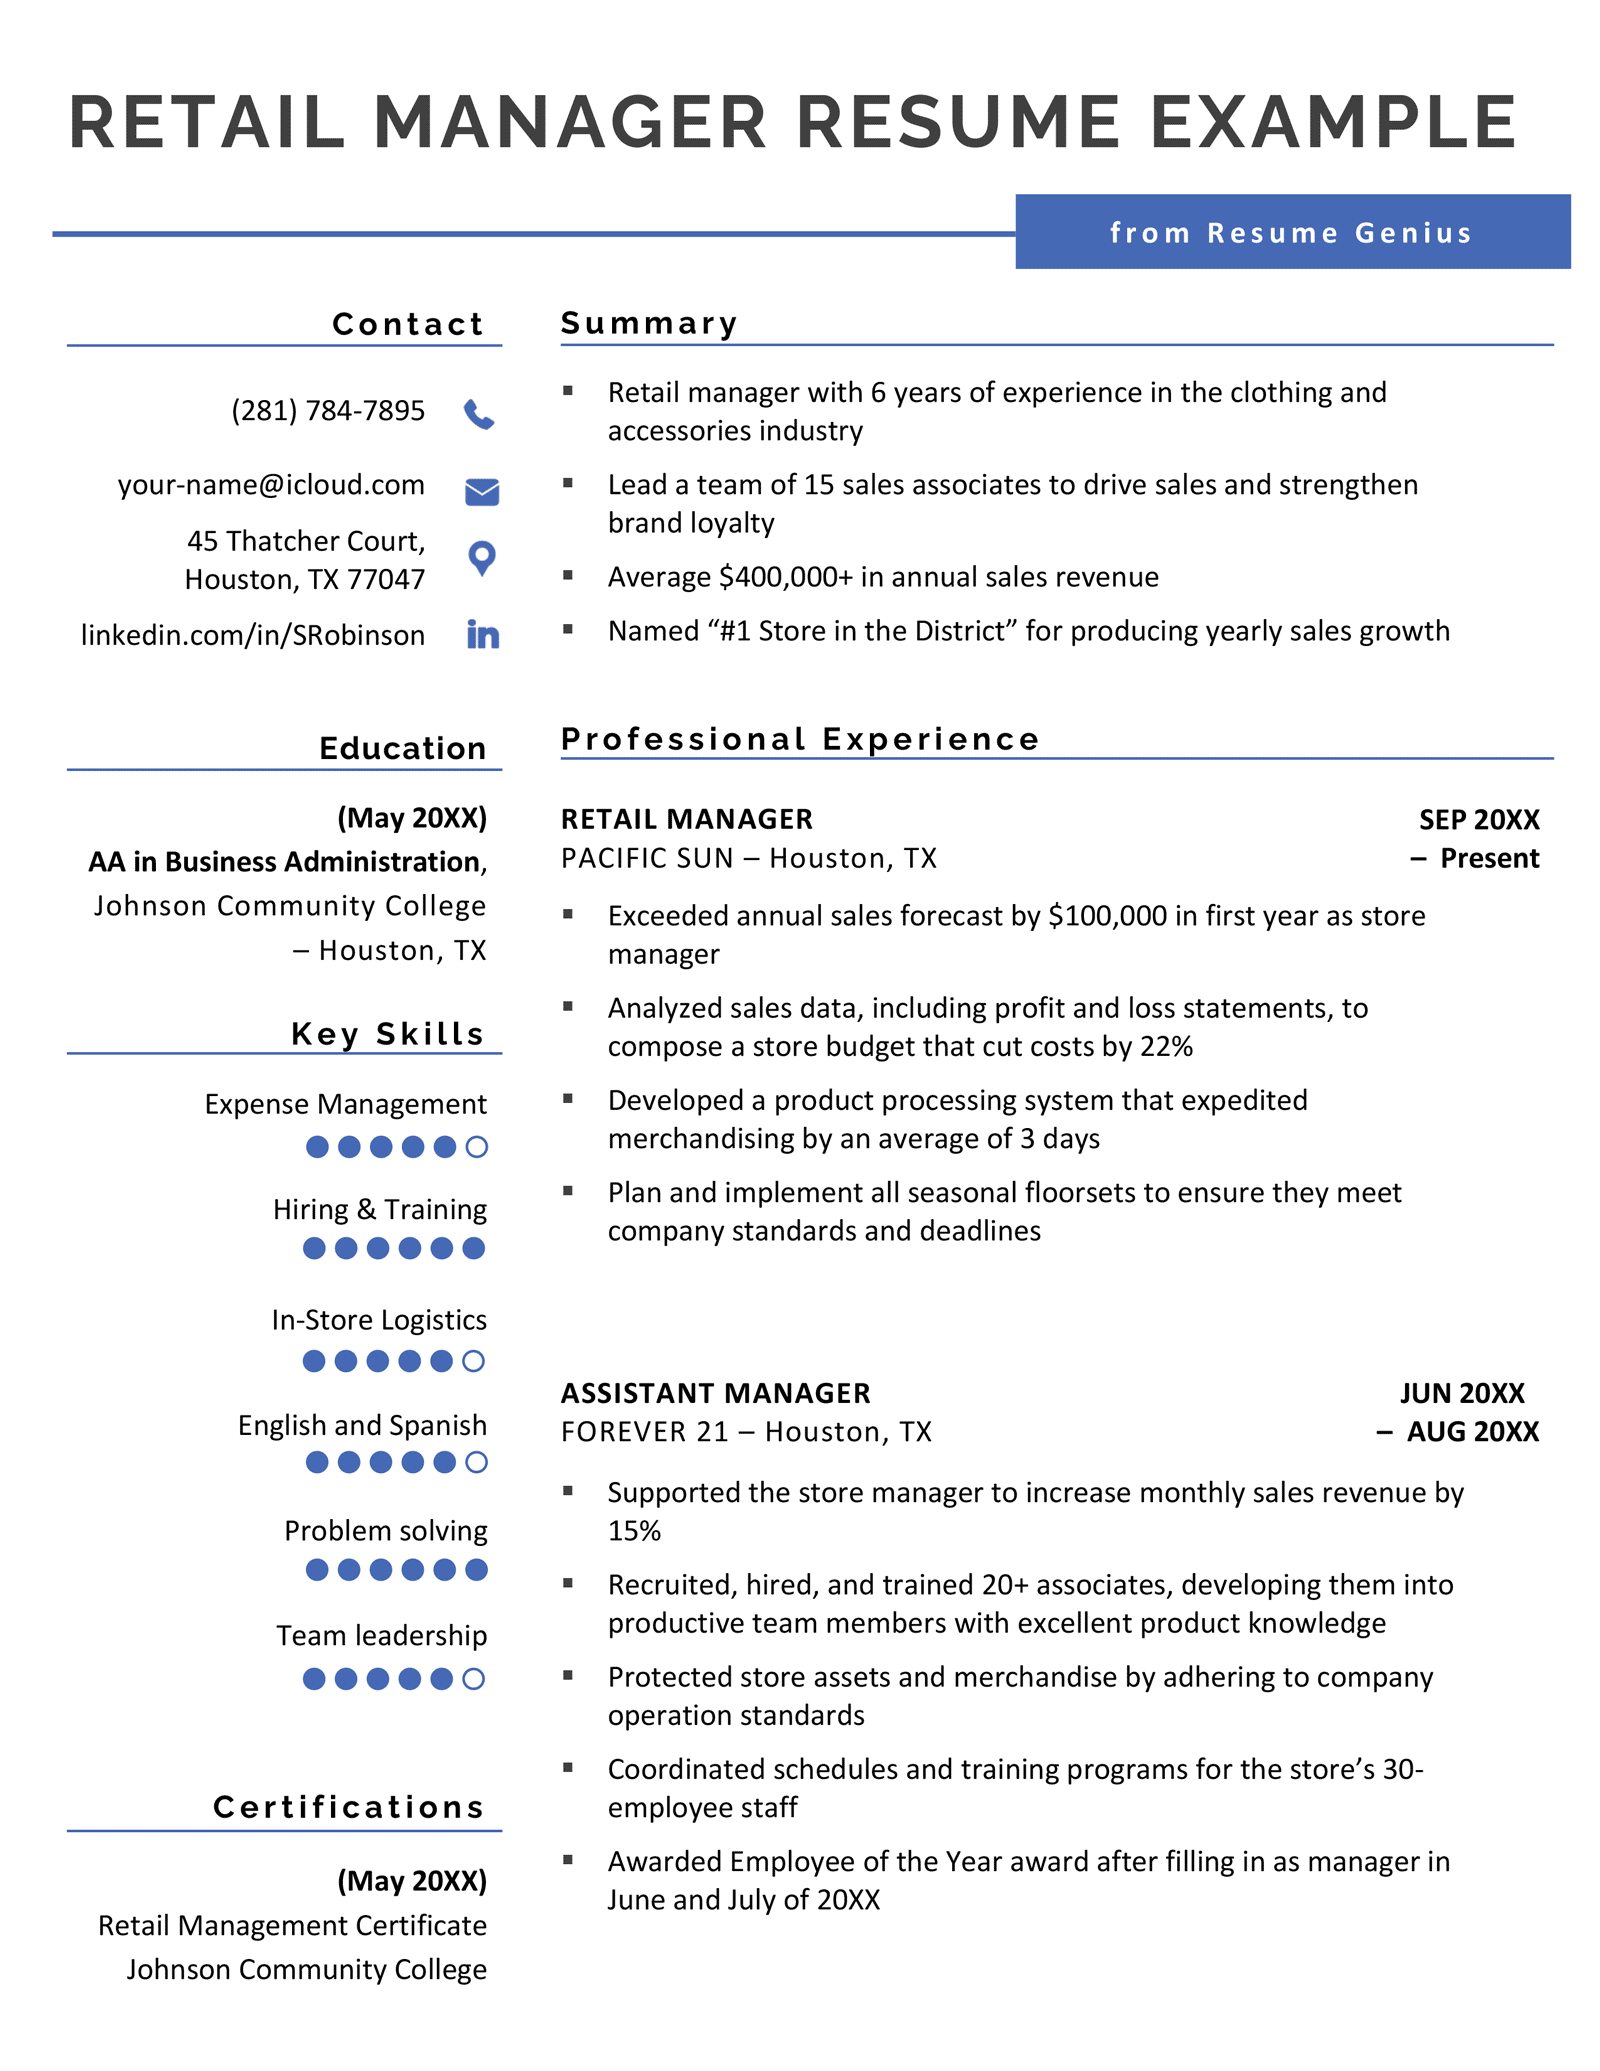 An example retail manager resume